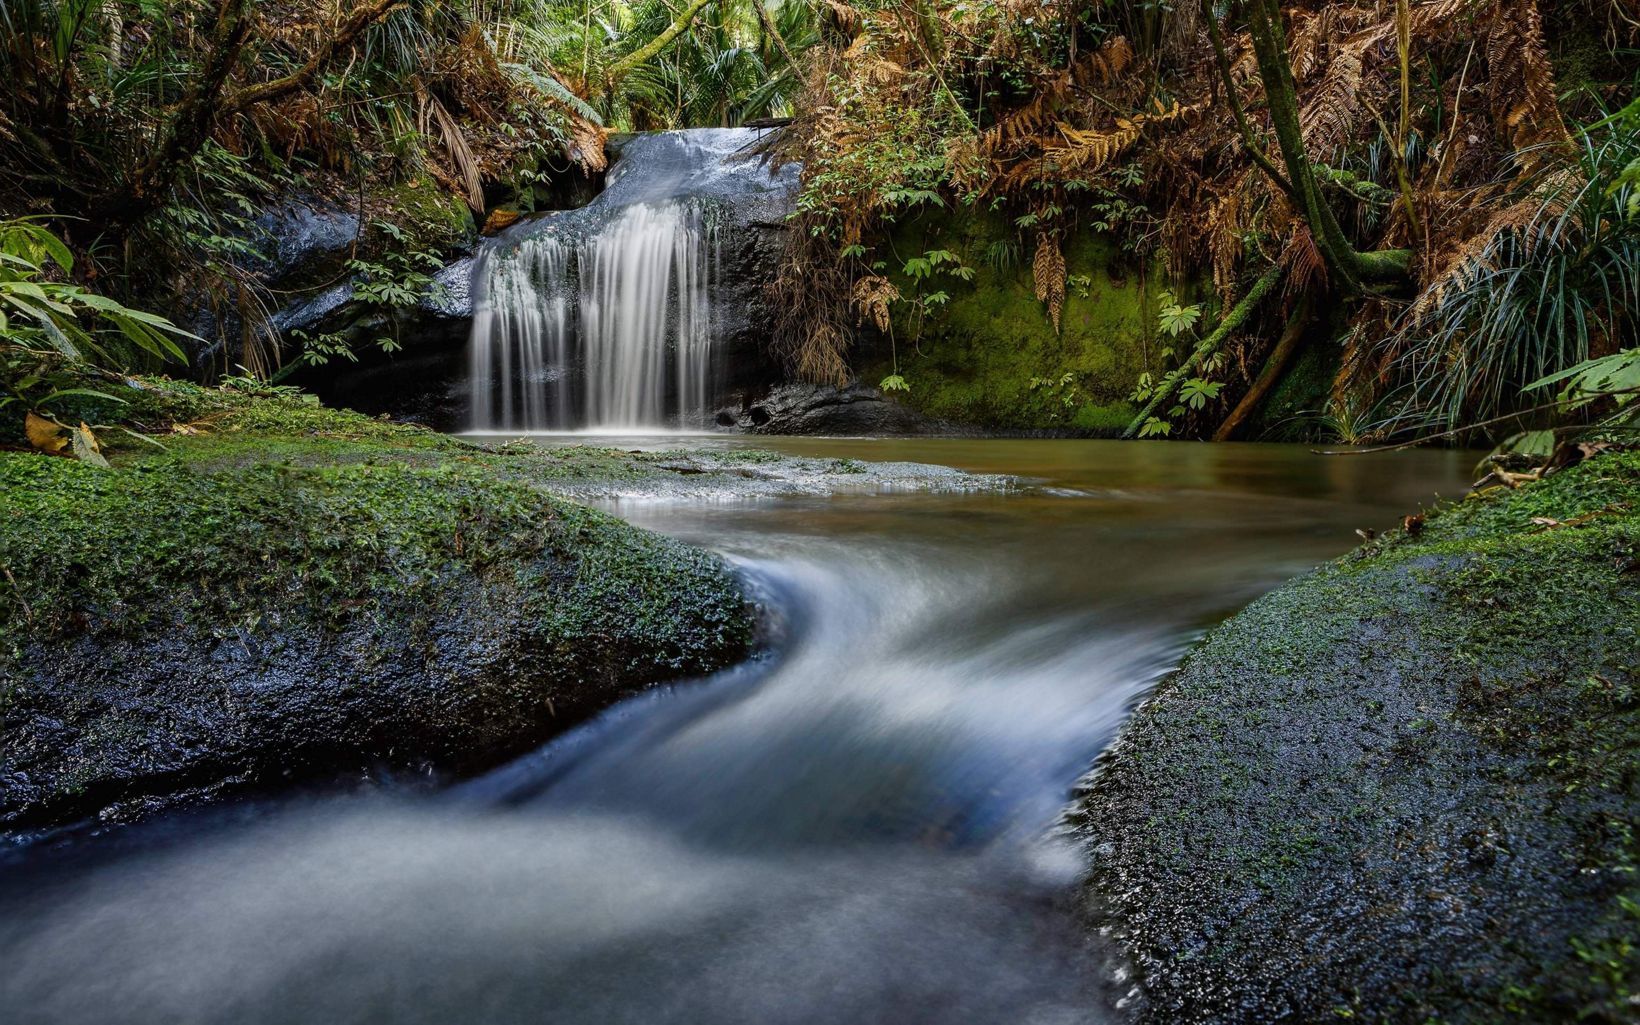 New Zealand's freshwater ecosystems range from glaciers to lowland streams.